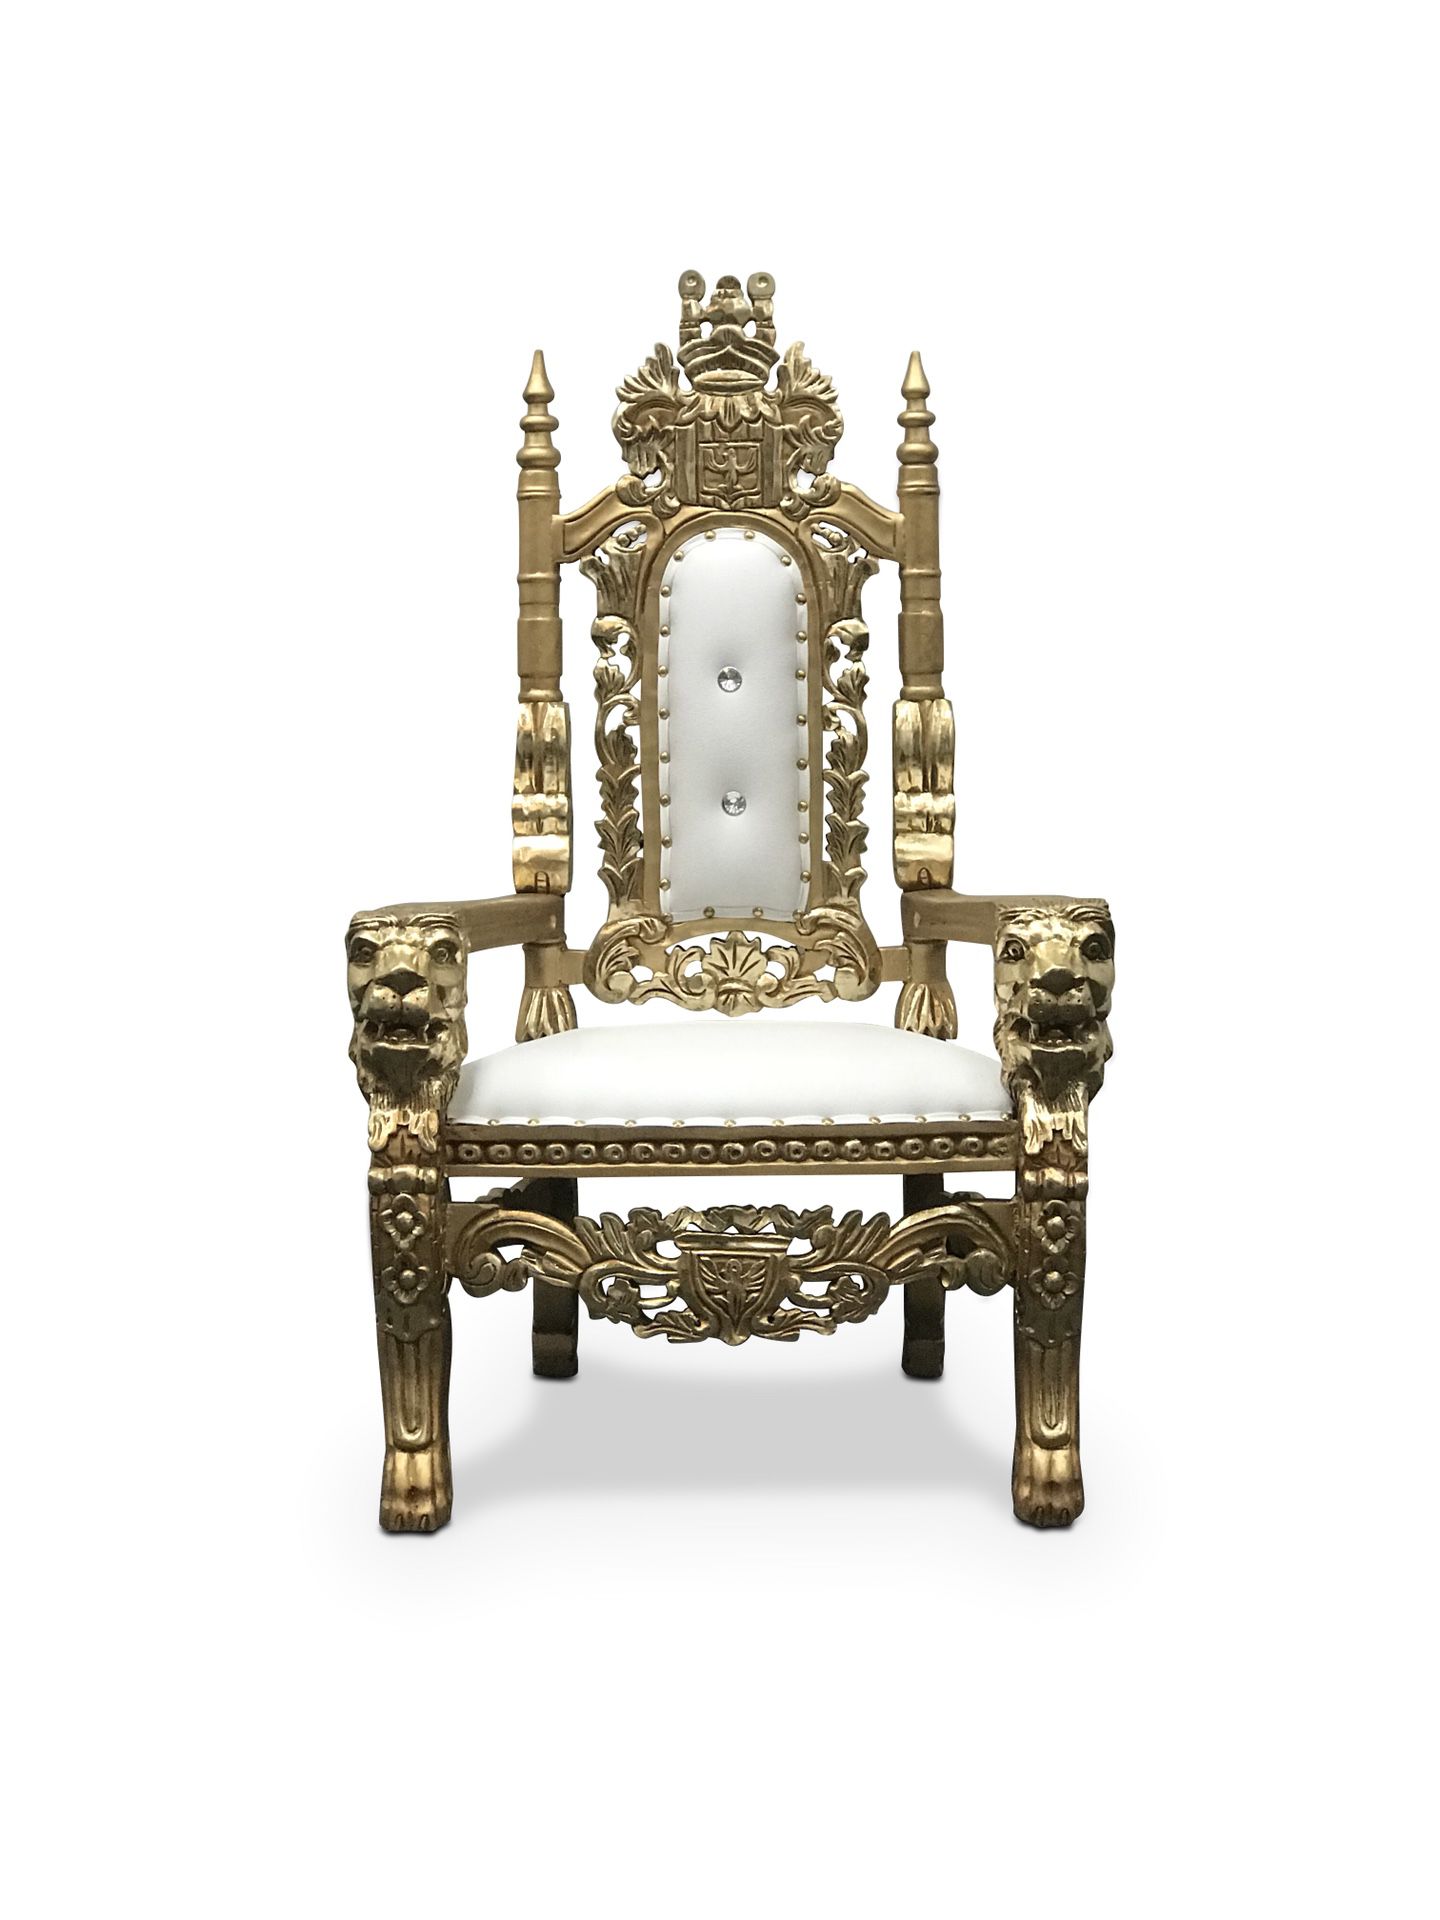 Free nationwide delivery | kids Throne chairs king queen princess royal baroque wedding event party photography hotel lounge boutique furniture